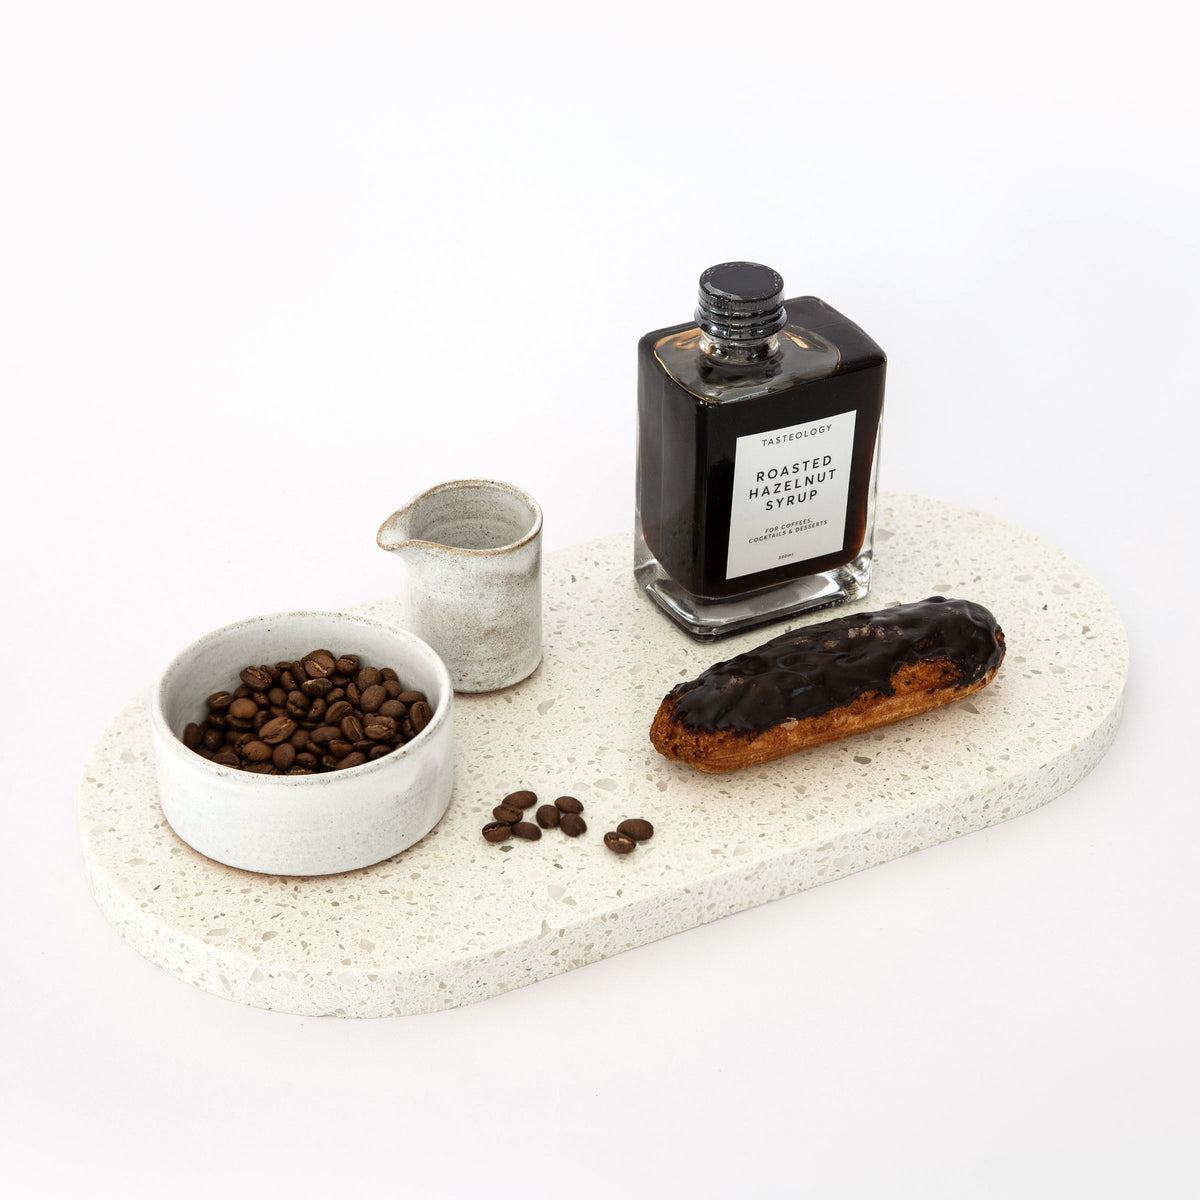 Double arch quartz platters in Caesarstone Nougat™ created by Aureliia Collection. The Double arch quartz dessert platter shown with chocolate éclair, coffee beans and Tasteology hazelnut syrup. An excellent home decor gift for someone who has it all.